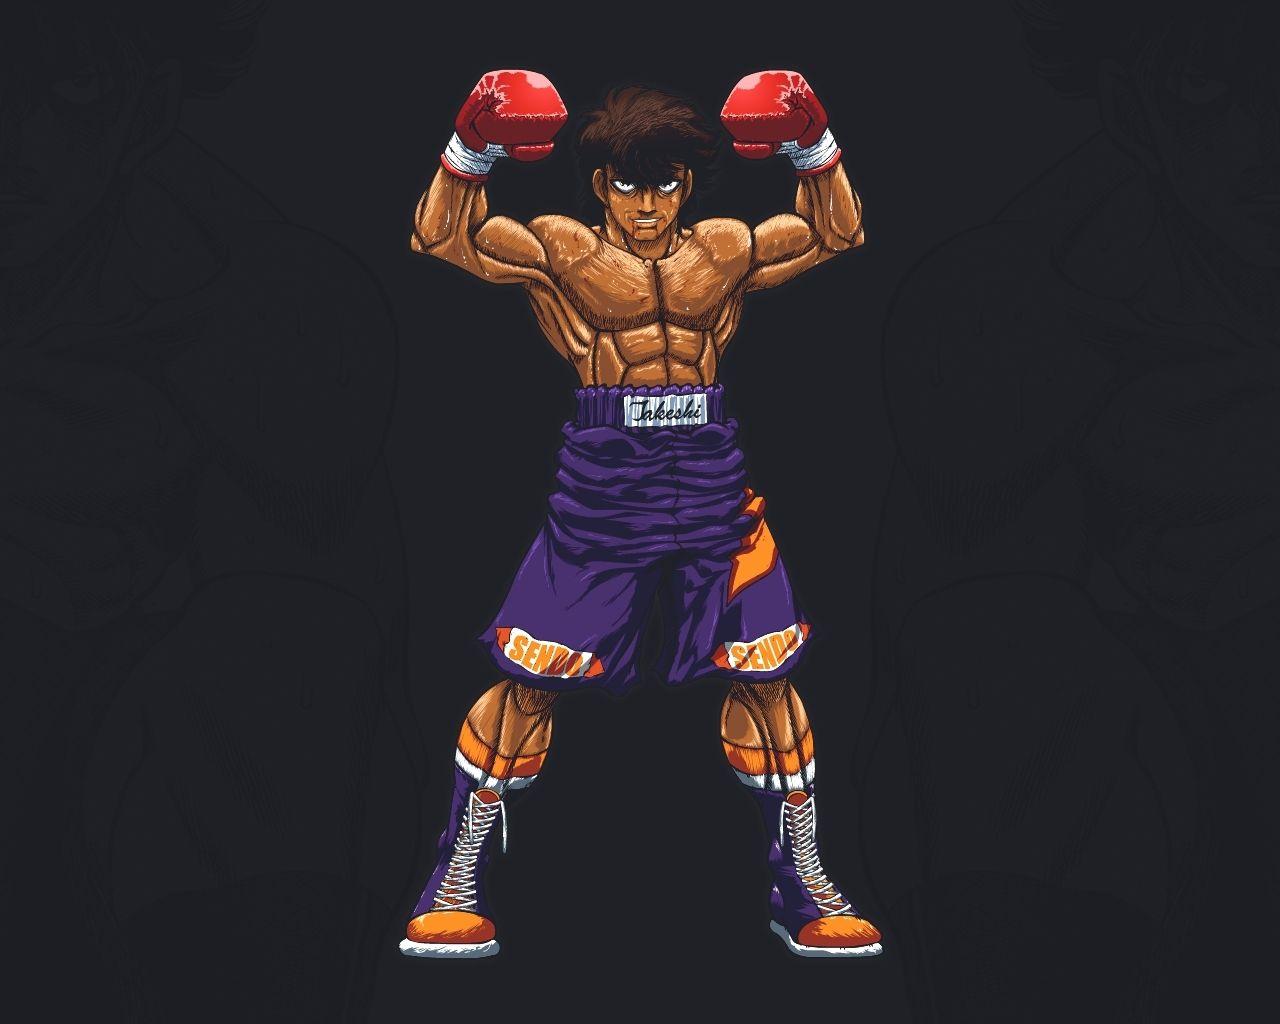 Anime fan art/ Boxing fan art | Recent anime, Cool anime pictures, Good  anime to watch